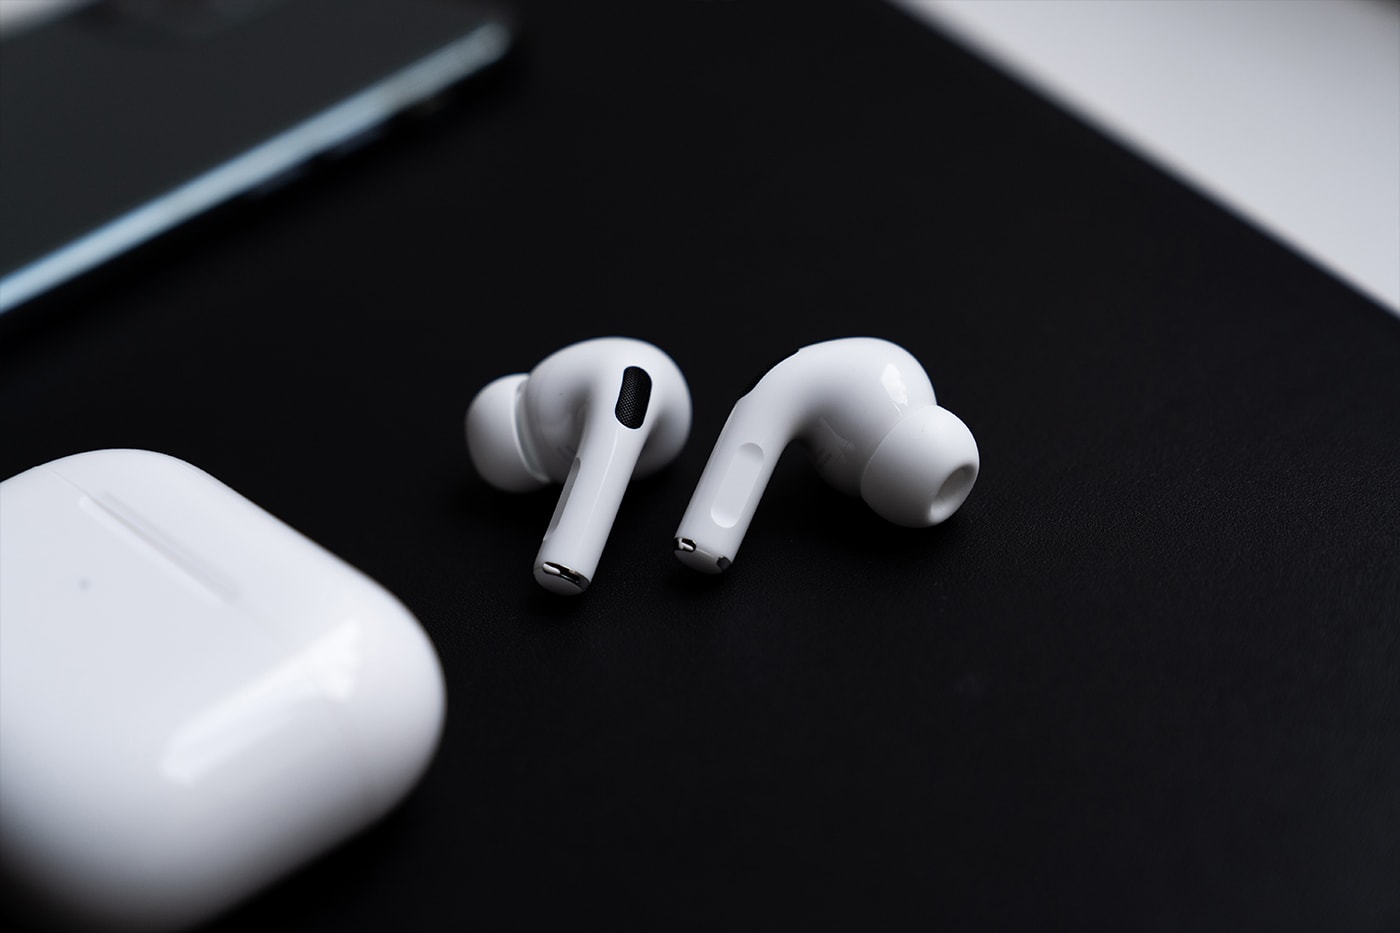 Apple AirPods Pro Closer Look Release info Date Buy on hands Review white color Active Noise Cancellation Adaptive EQ Transparency mode Charging Features 